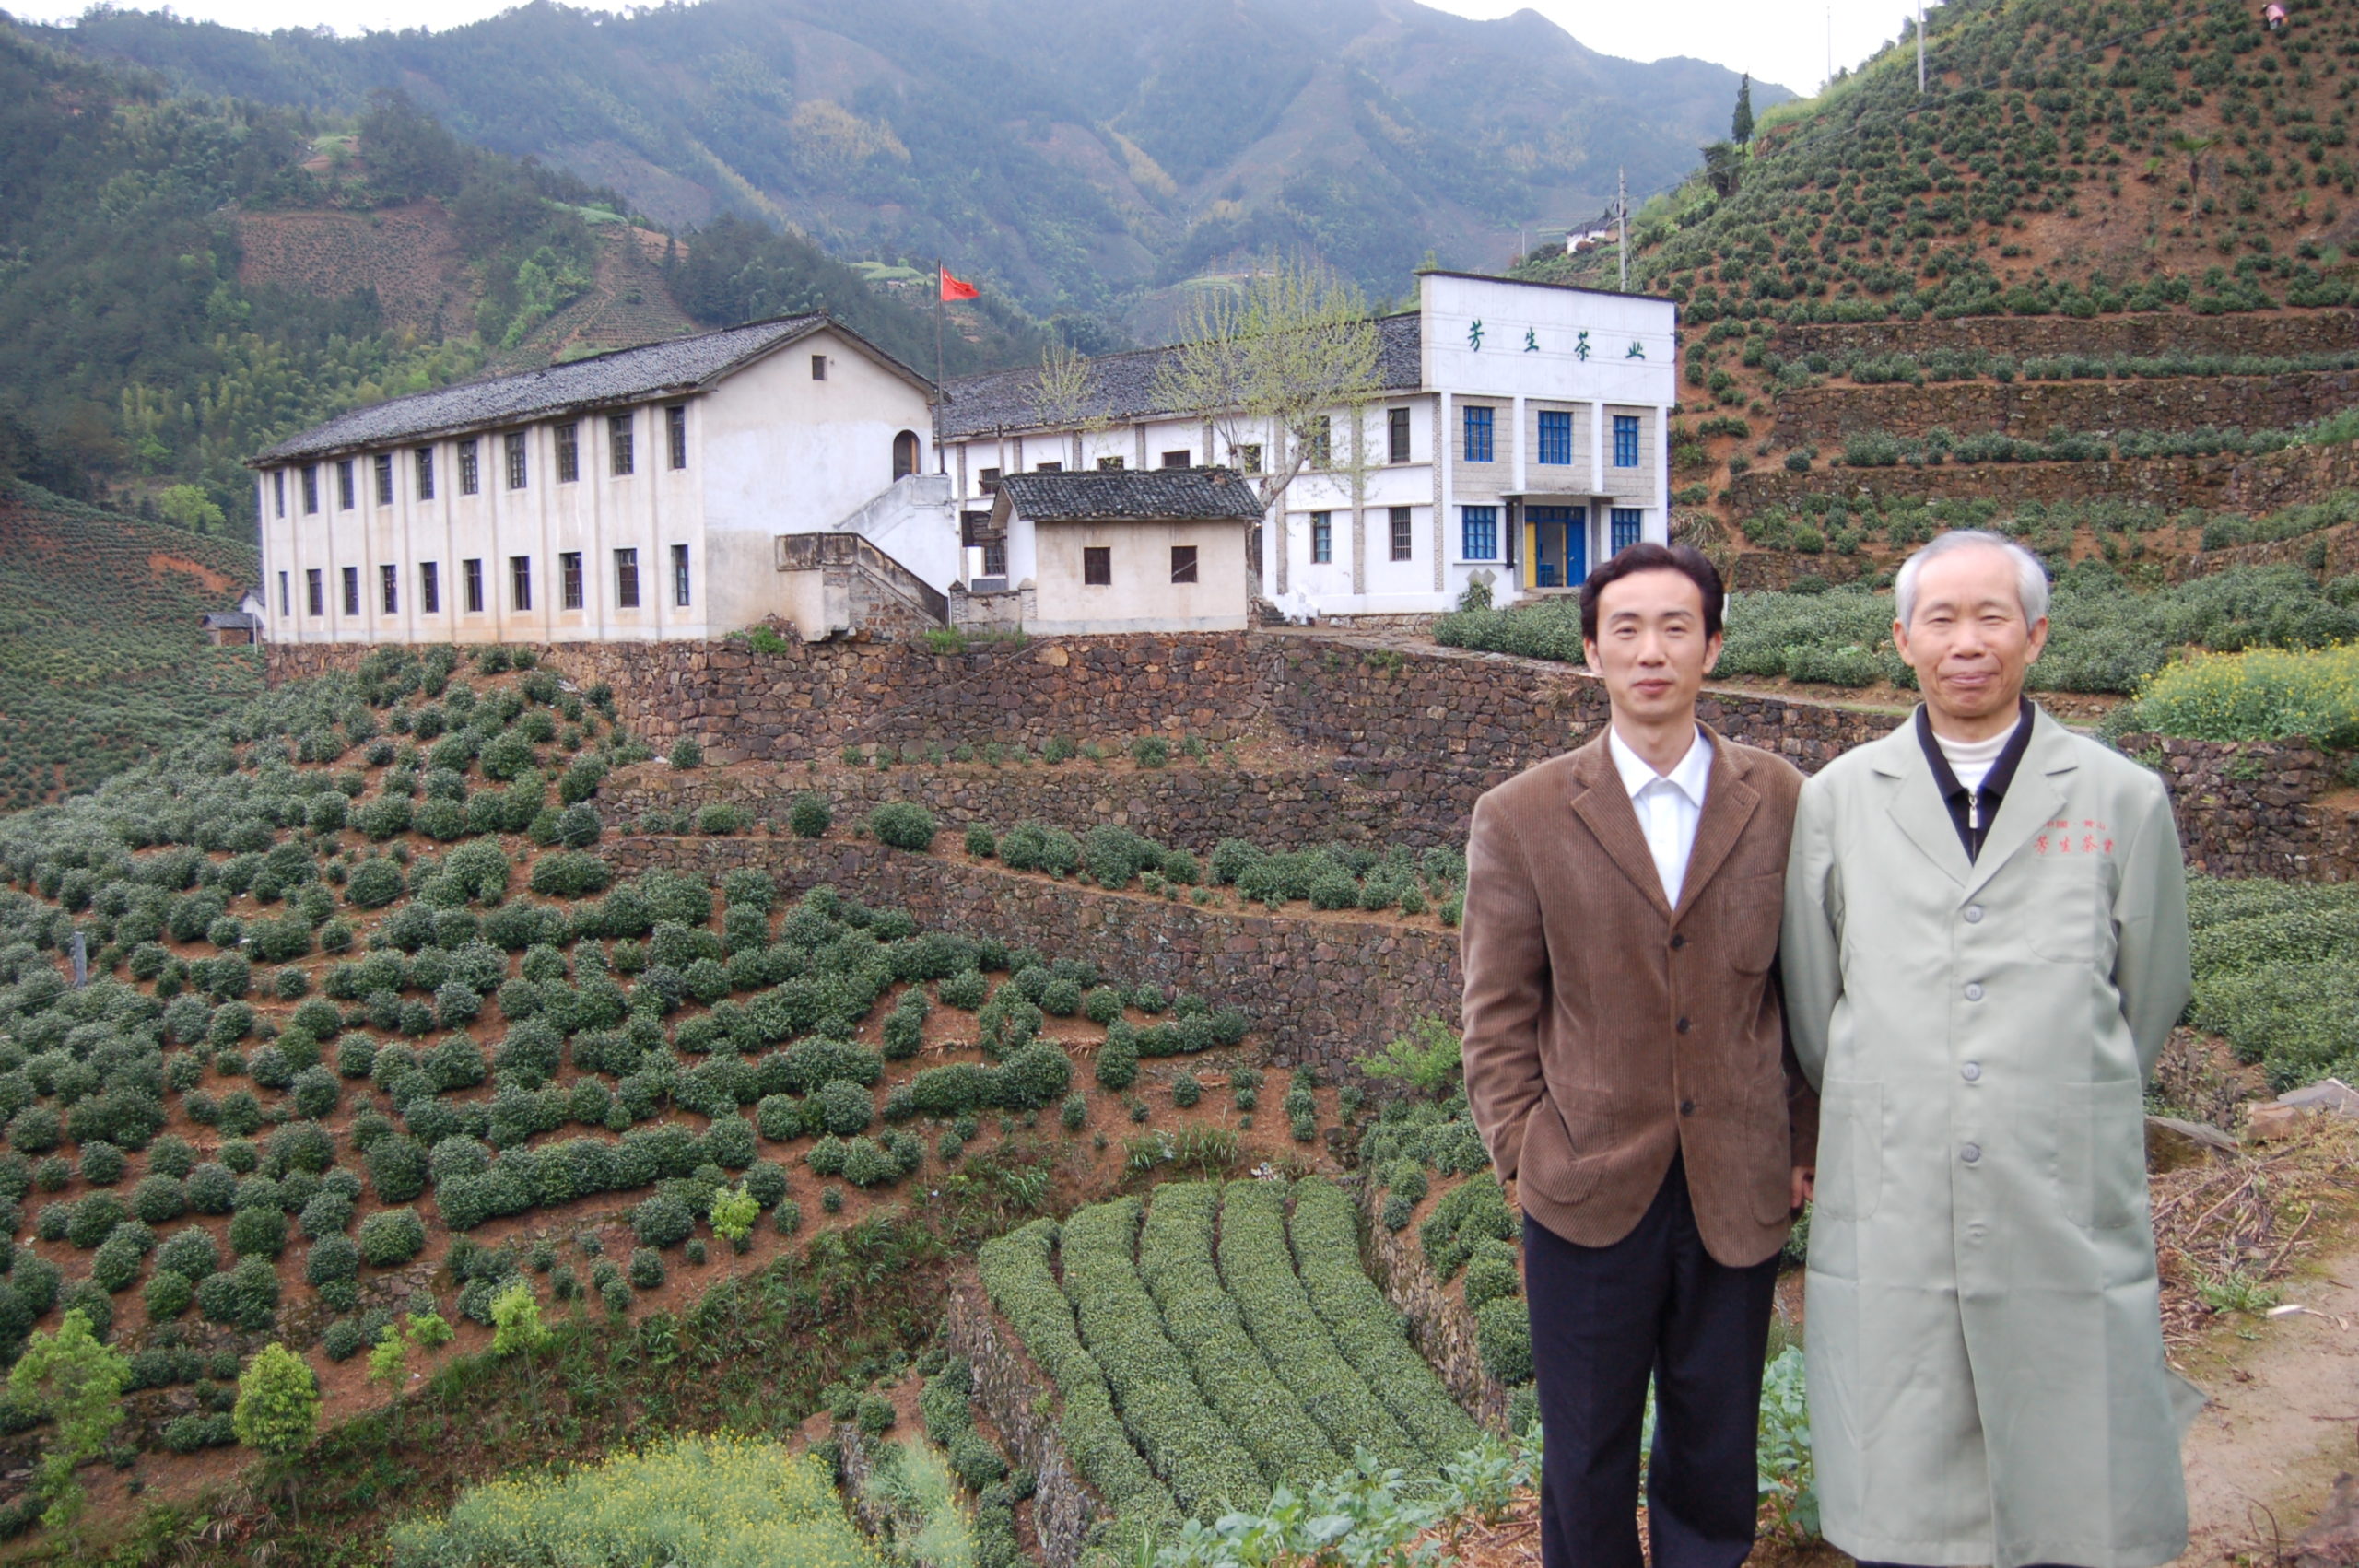 Wang Fangsheng (right) and Wang Huizhou (left), 5th and 6th generation tea makers, stand in front of their unique mountainside tea factory. This picture is from 2006, the first time Austin met them.